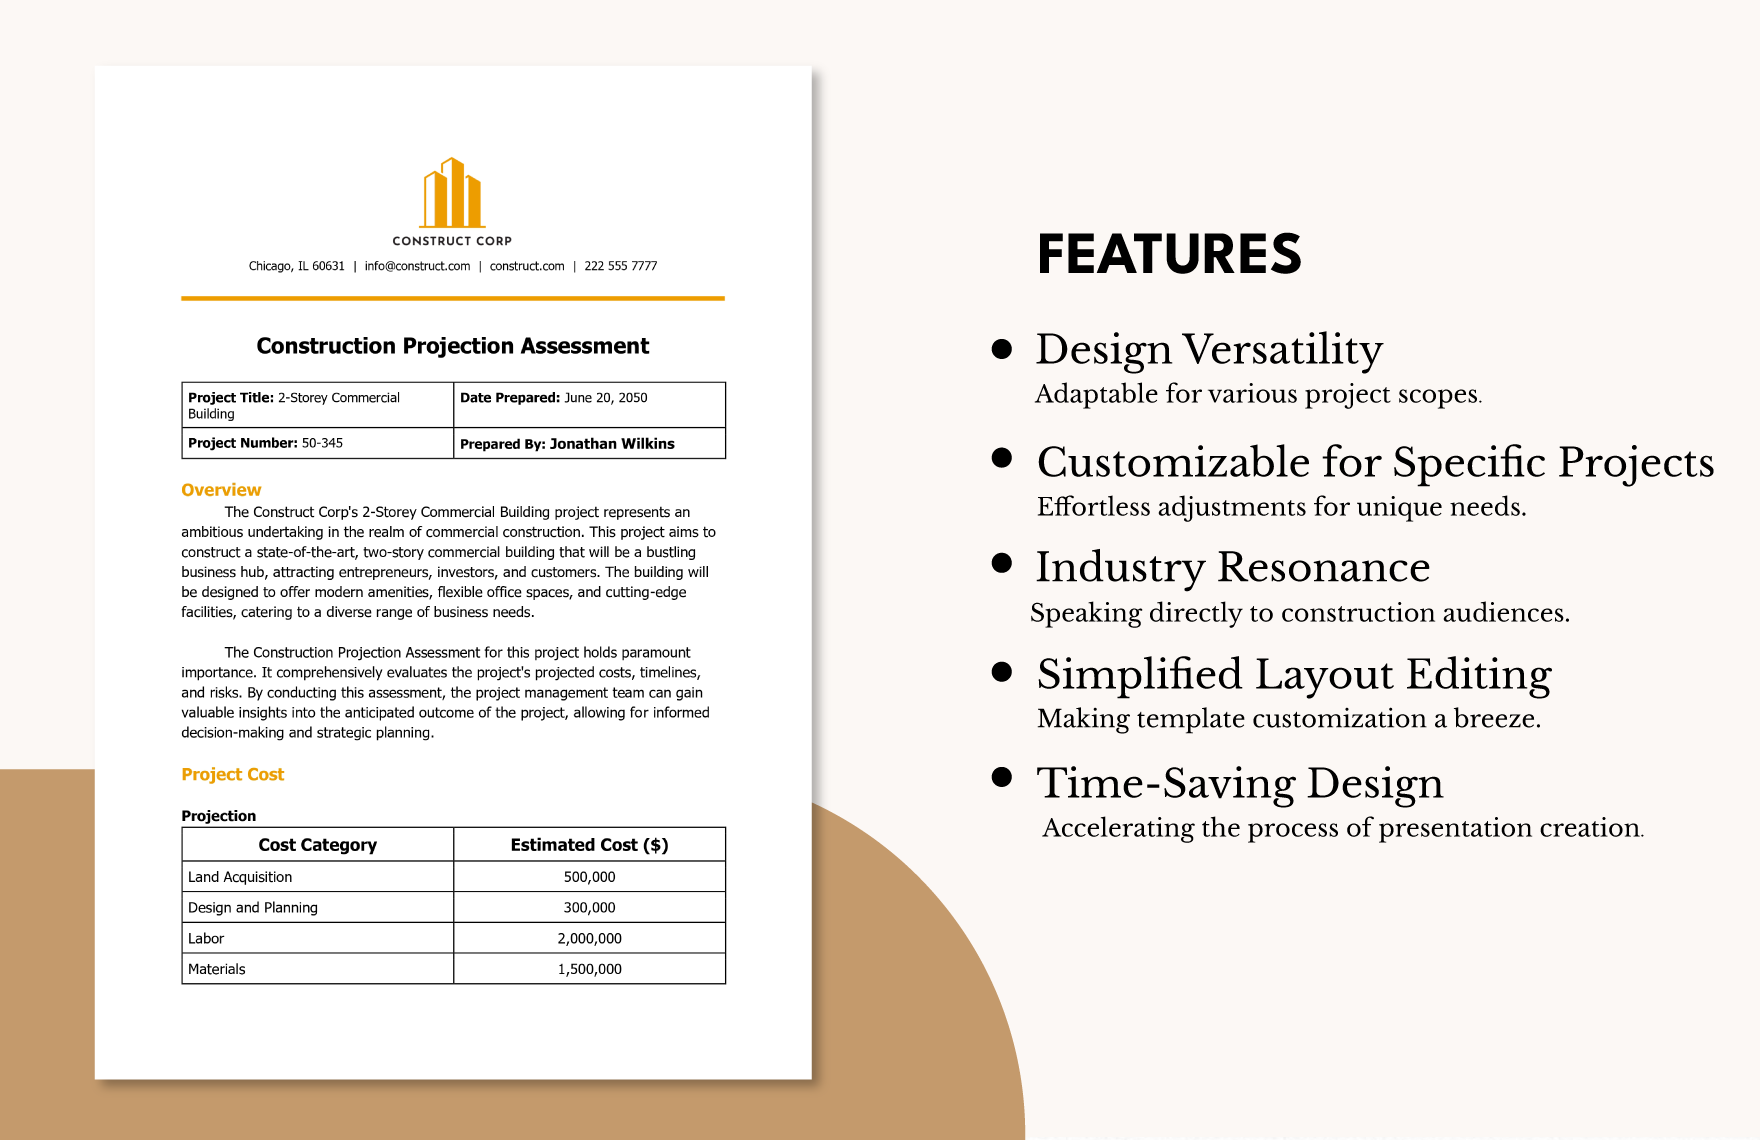 Construction Projection Assessment Template